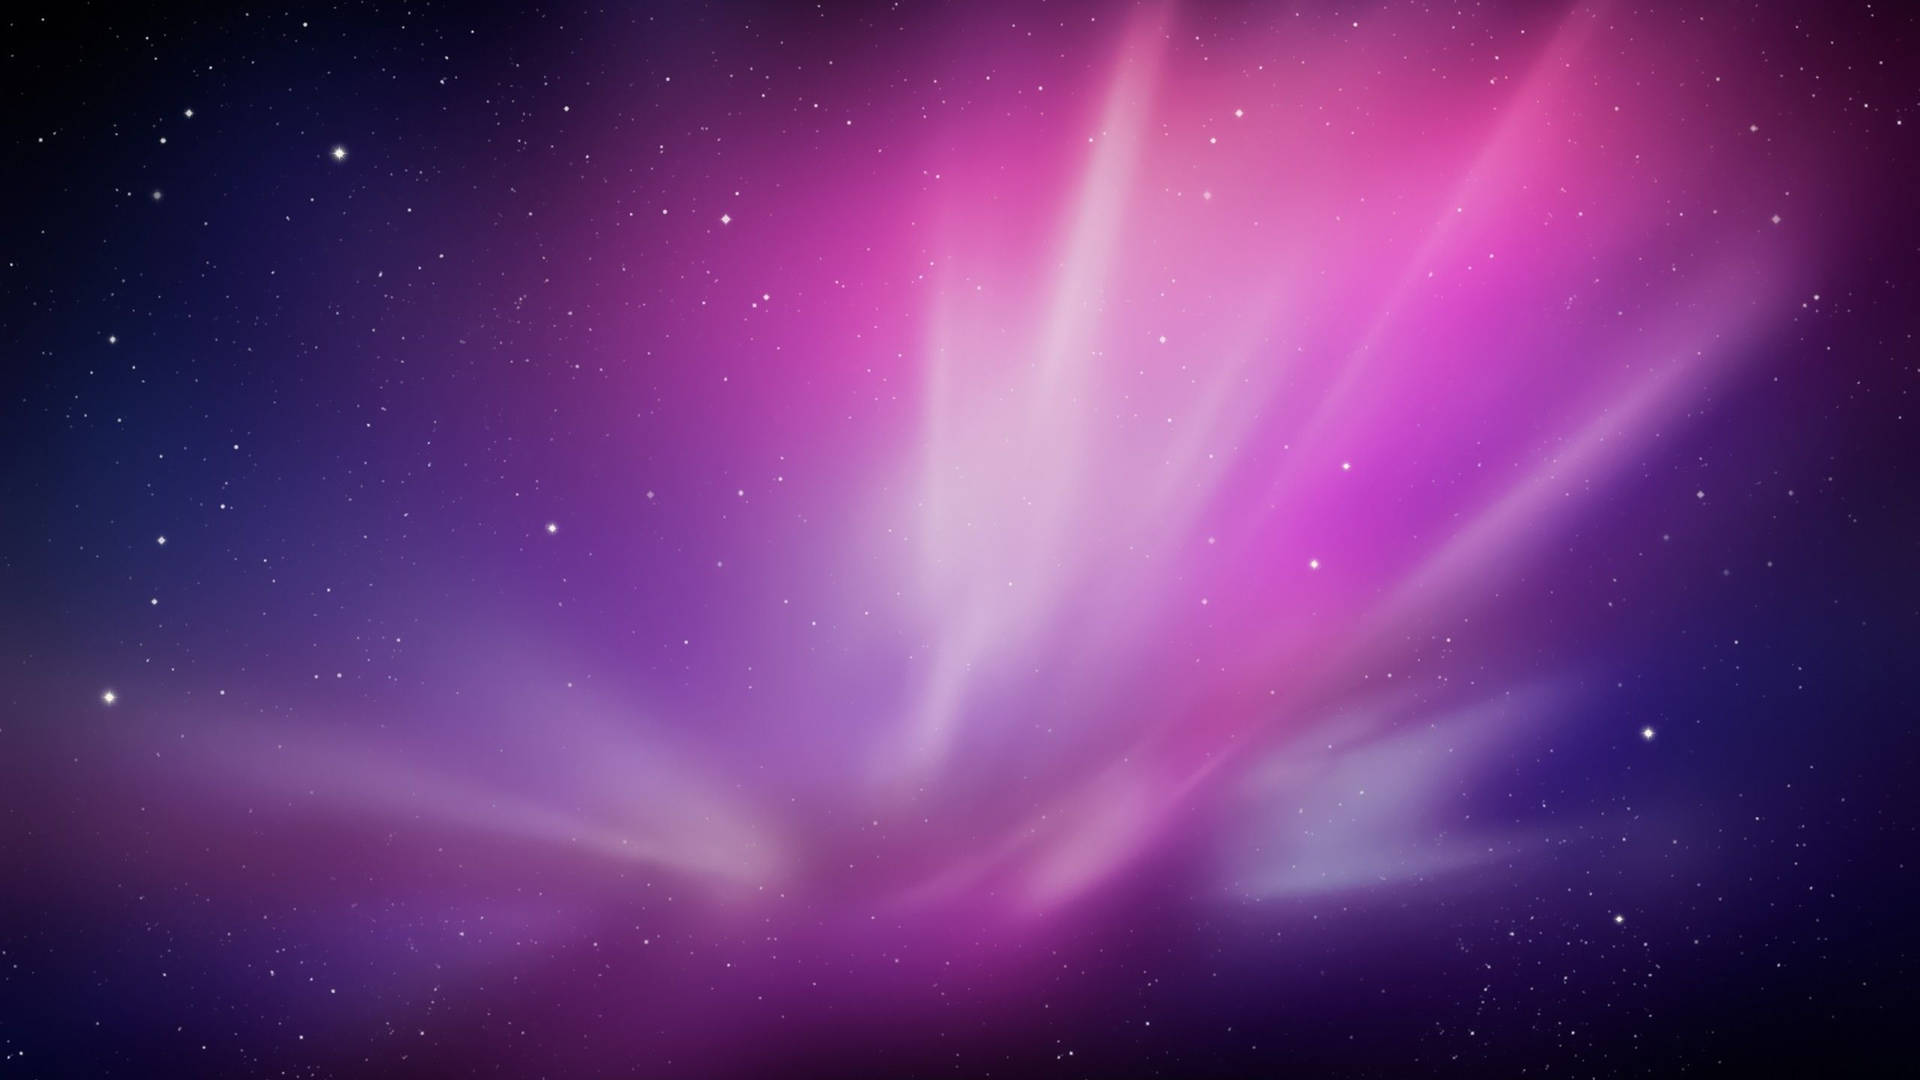 2560X1440 Mac Wallpaper and Background